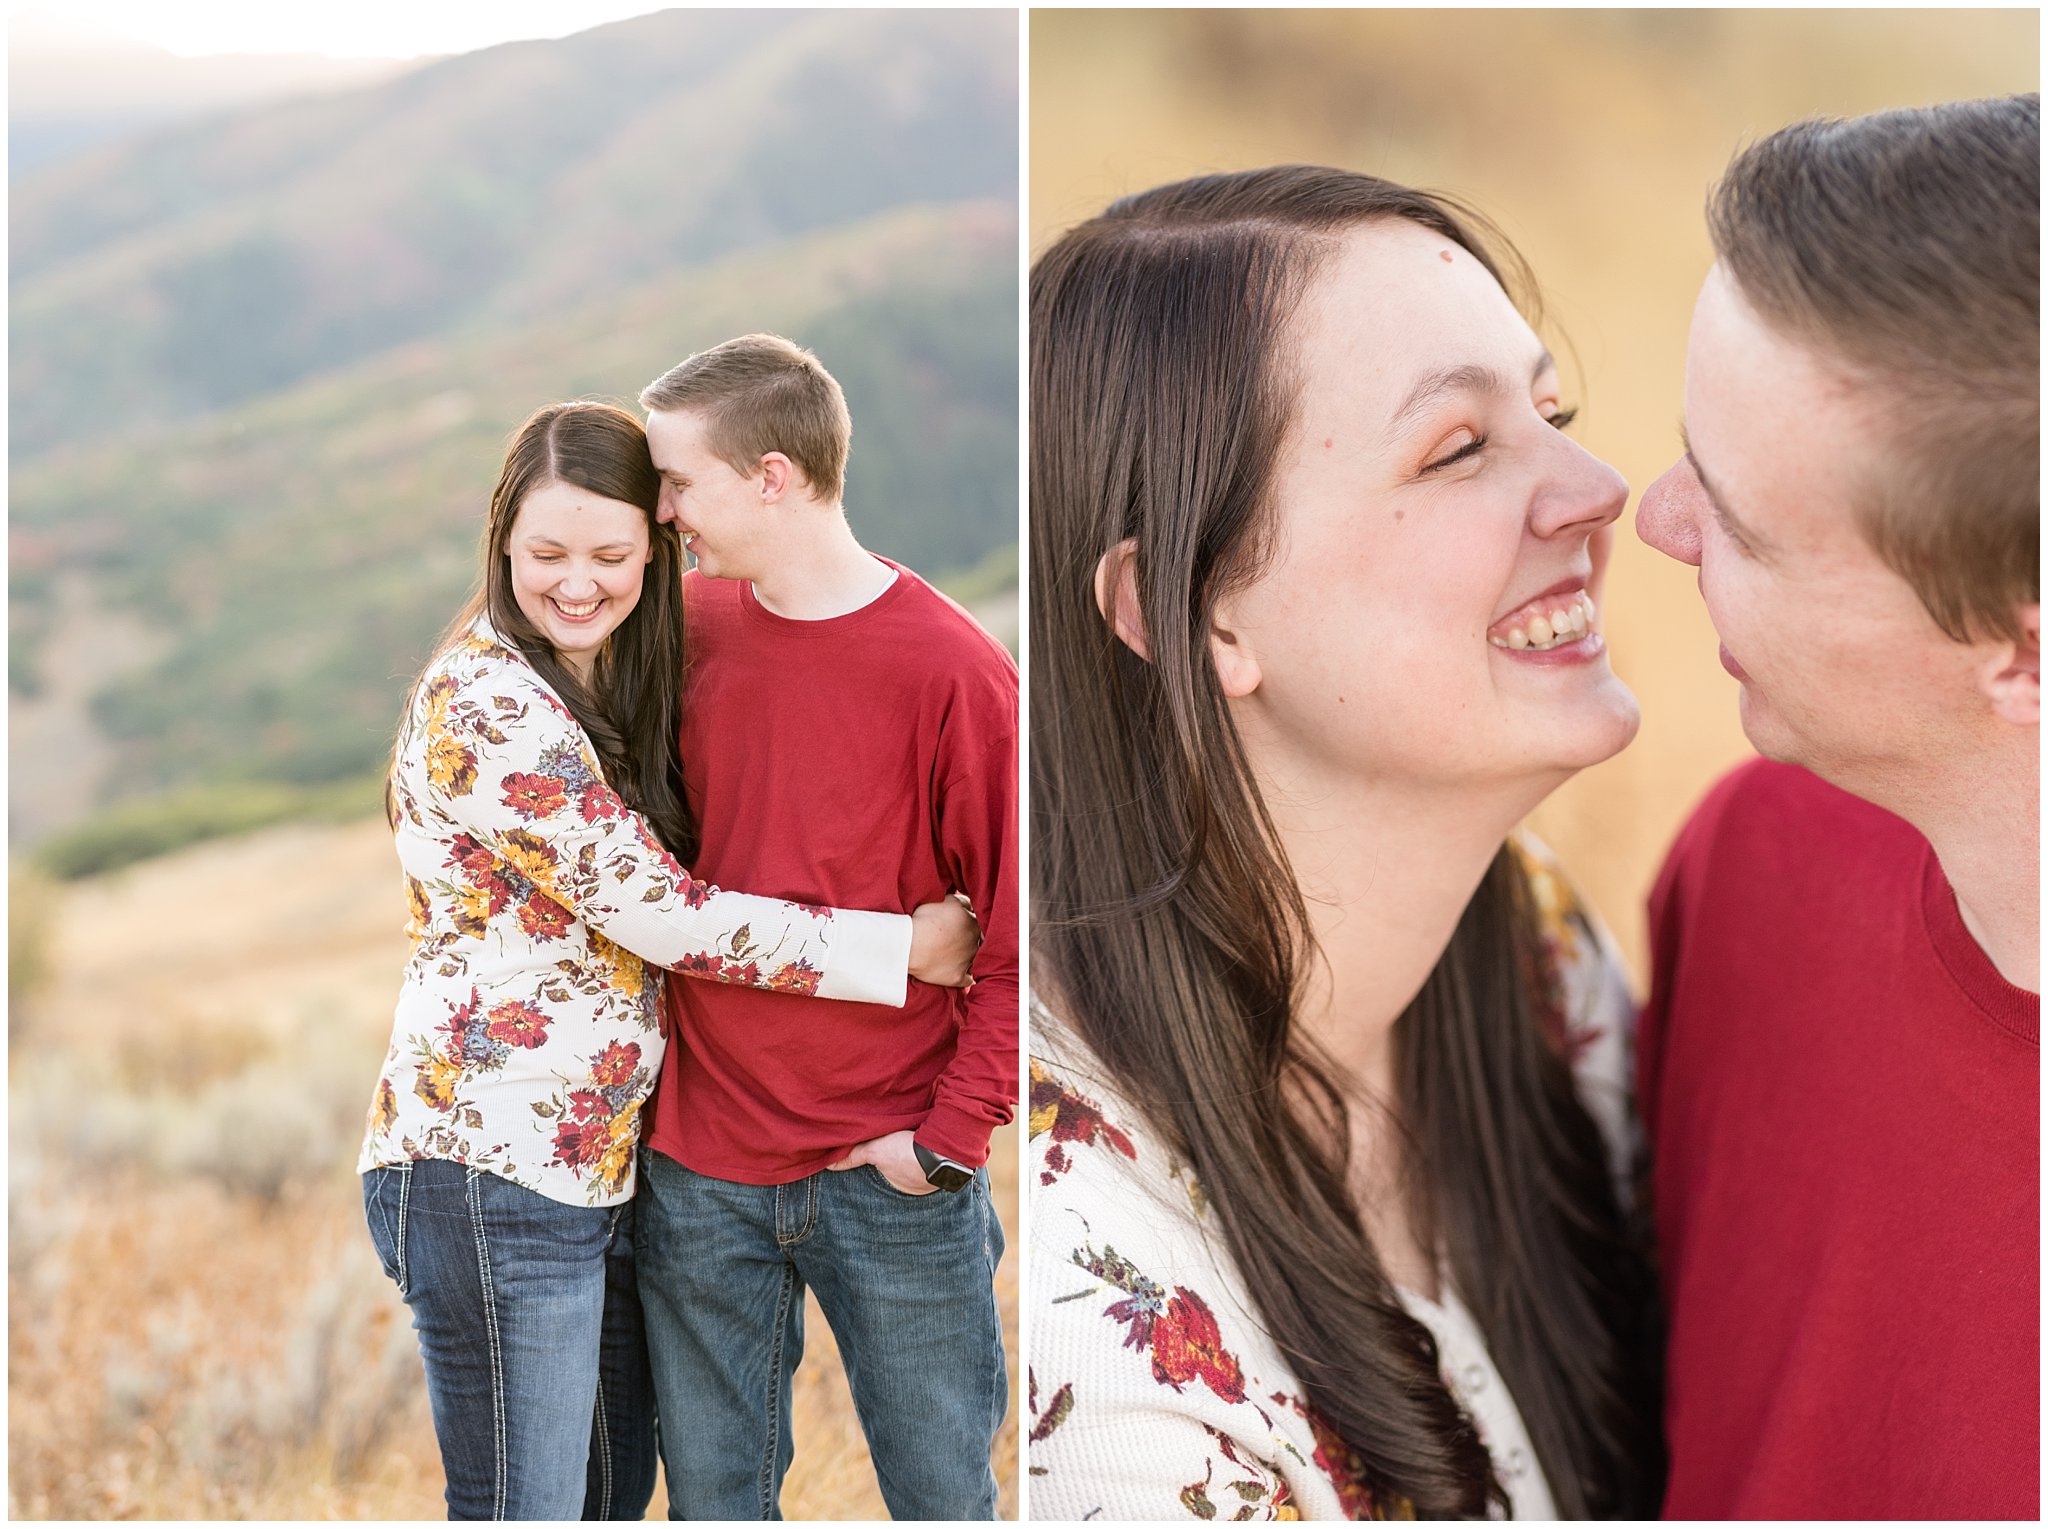 Candid couple picture during family picture session in the mountains | Fall Family Pictures at Snowbasin | Jessie and Dallin Photography